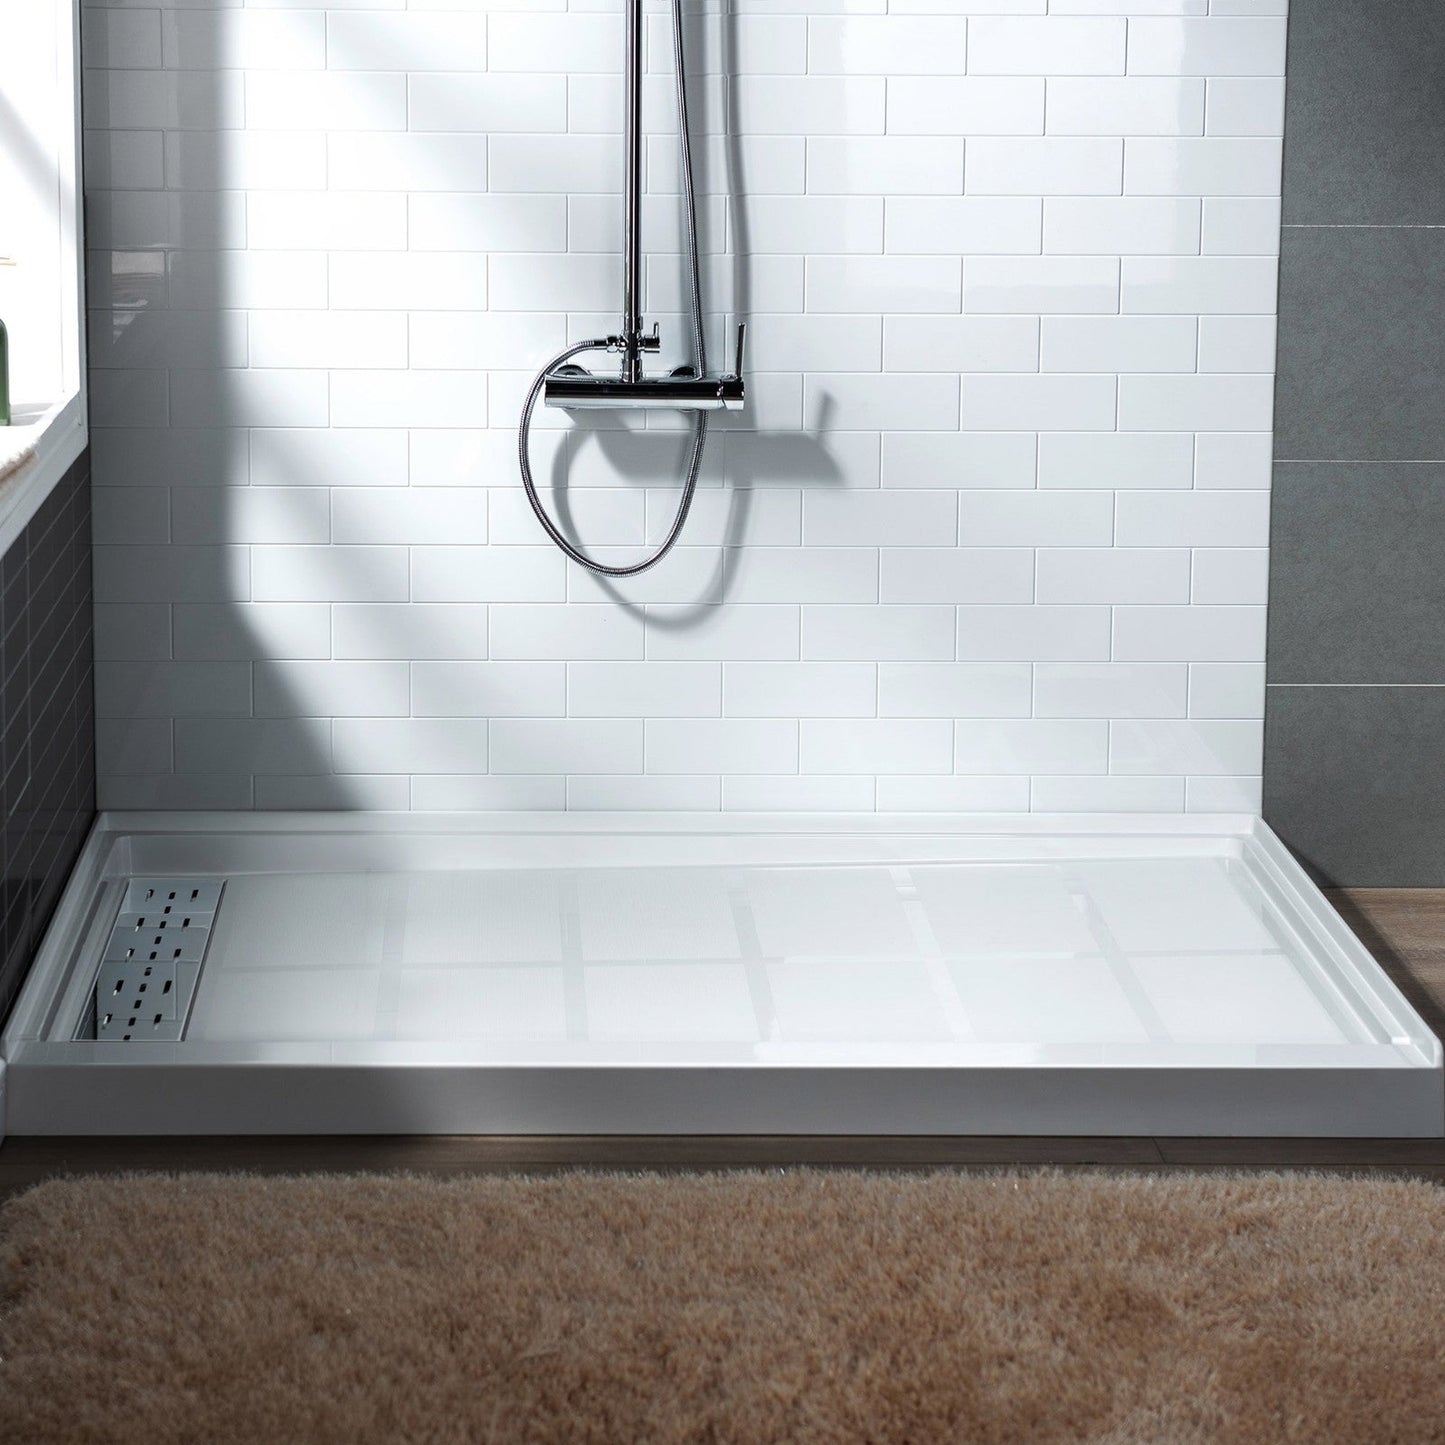 WoodBridge 60" x 34" White Solid Surface Shower Base Left Drain Location With Chrome Trench Drain Cover